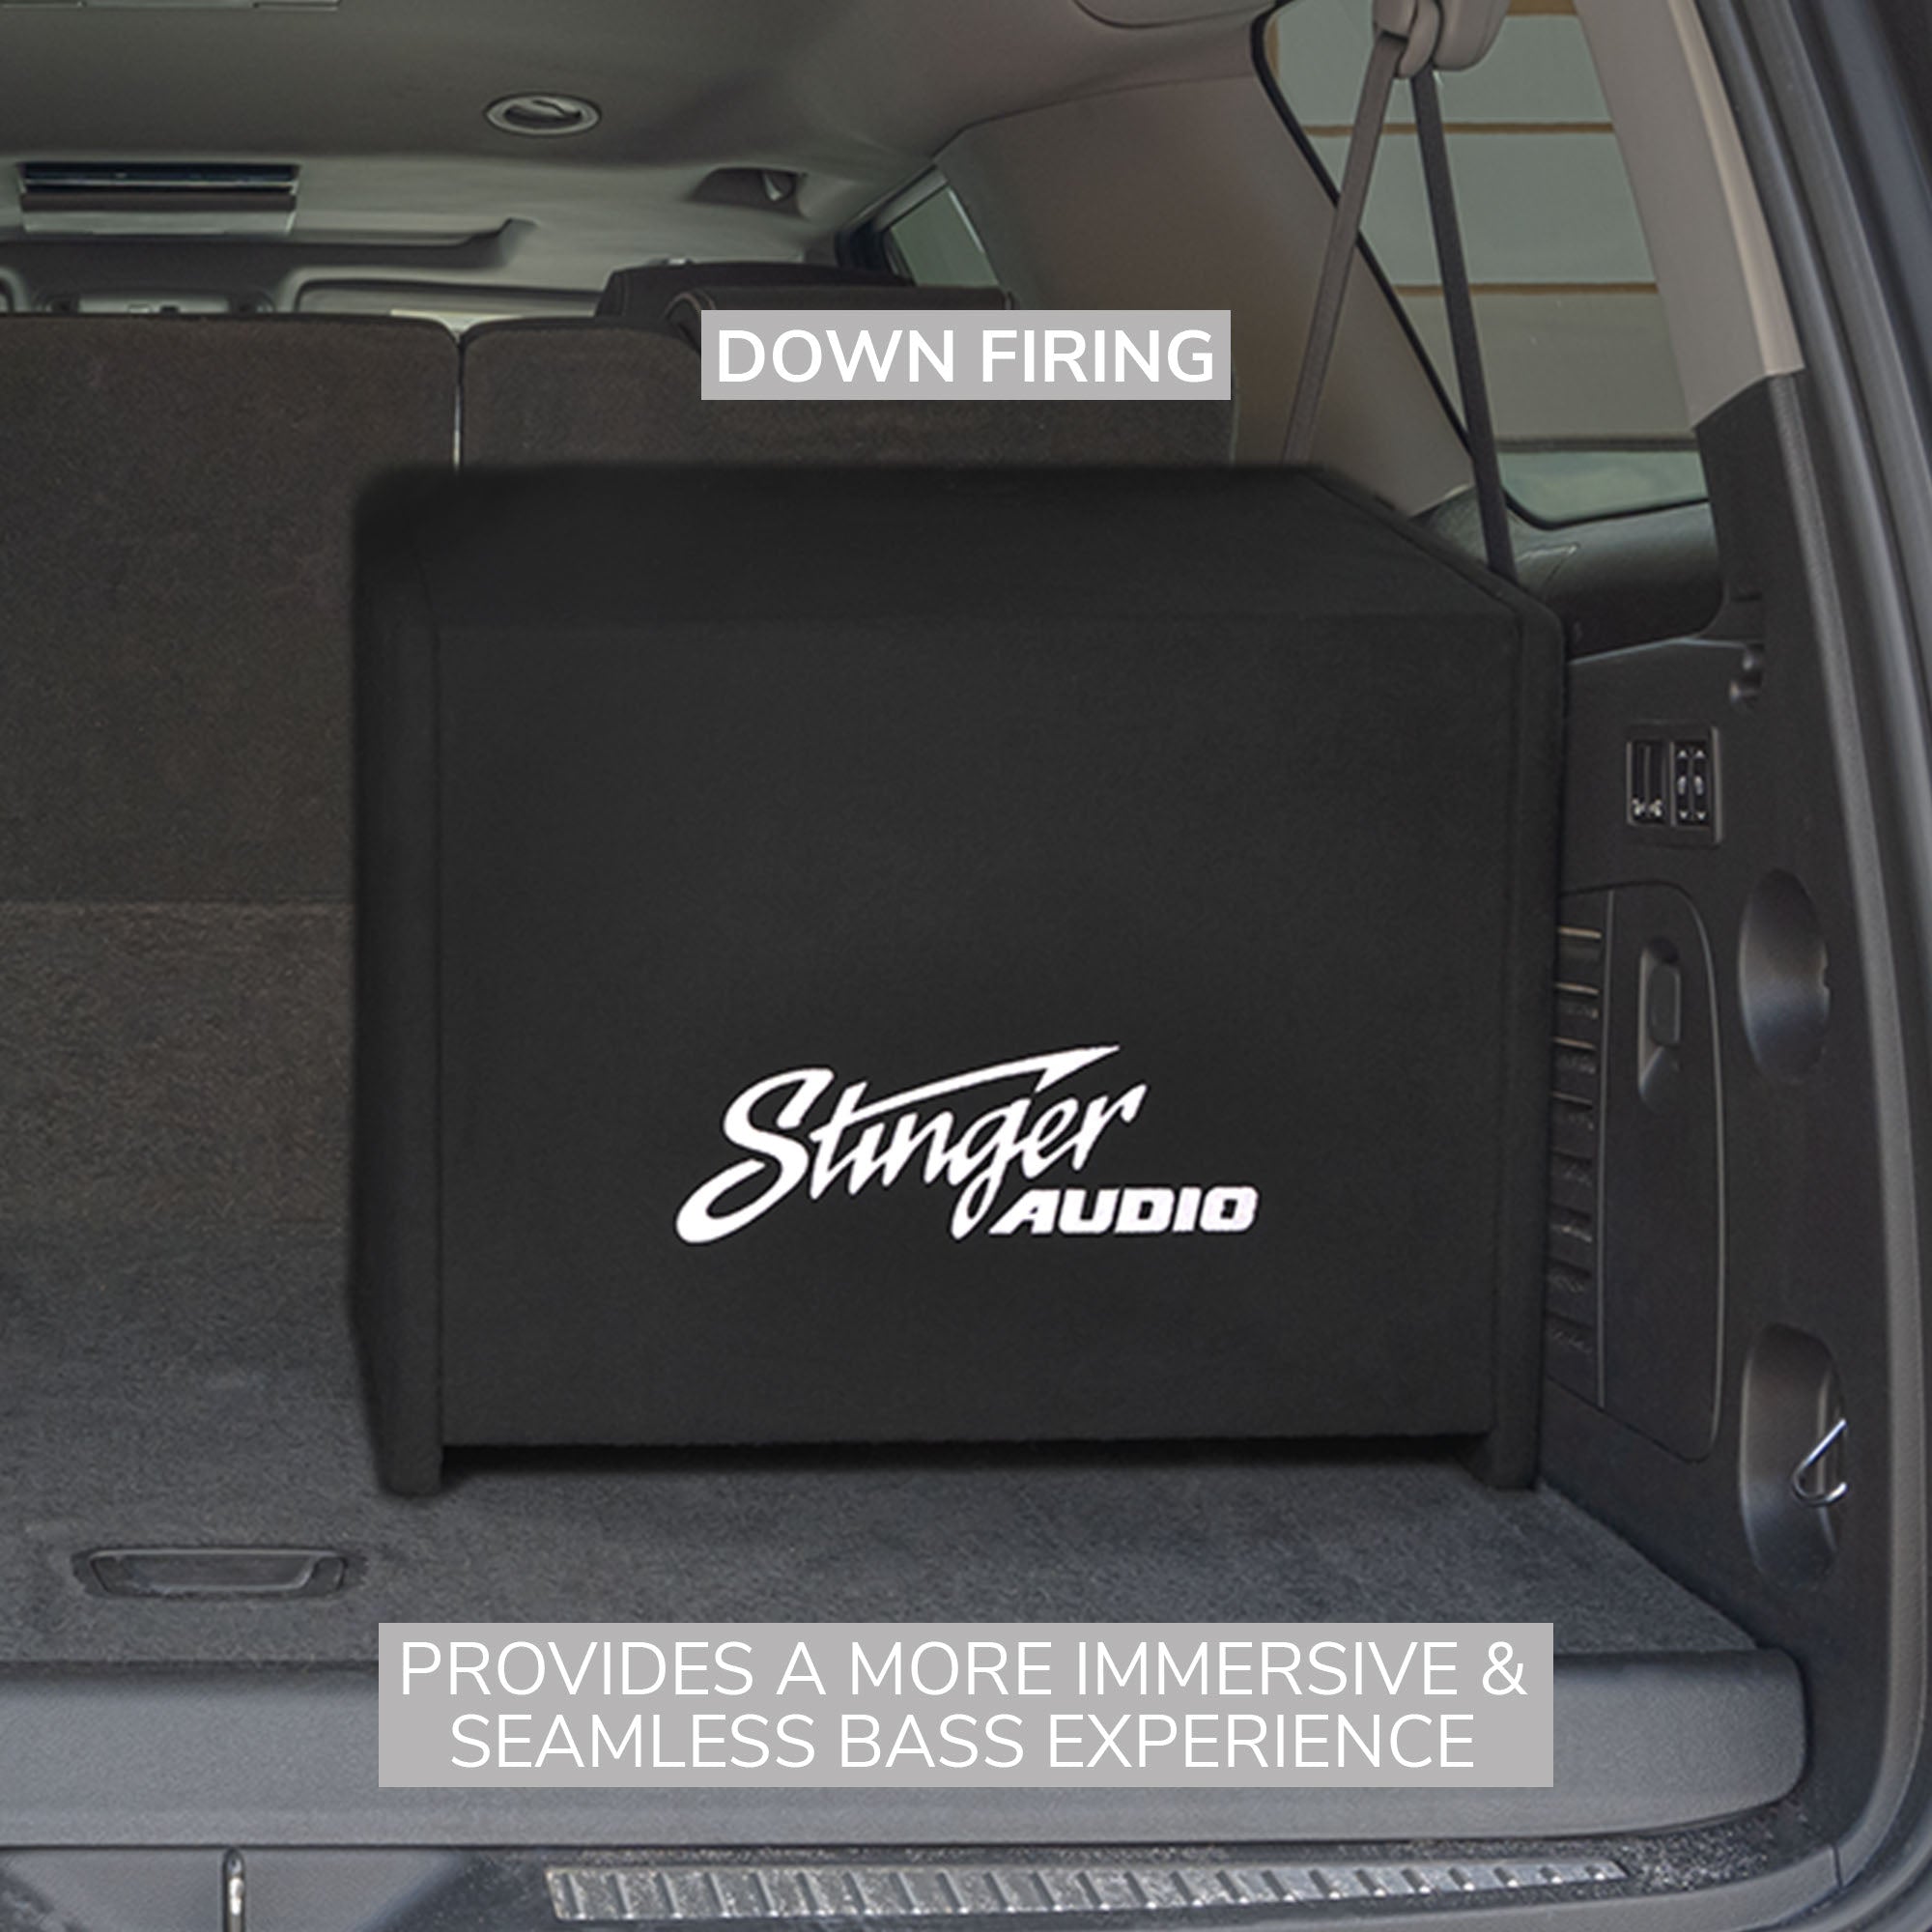 Single 12" 1,000 Watt (RMS) Loaded Ported Subwoofer Enclosure (1,000 Watts RMS/1,500 Watts Max) Bass Package with Amplifier & Complete Wiring Kit